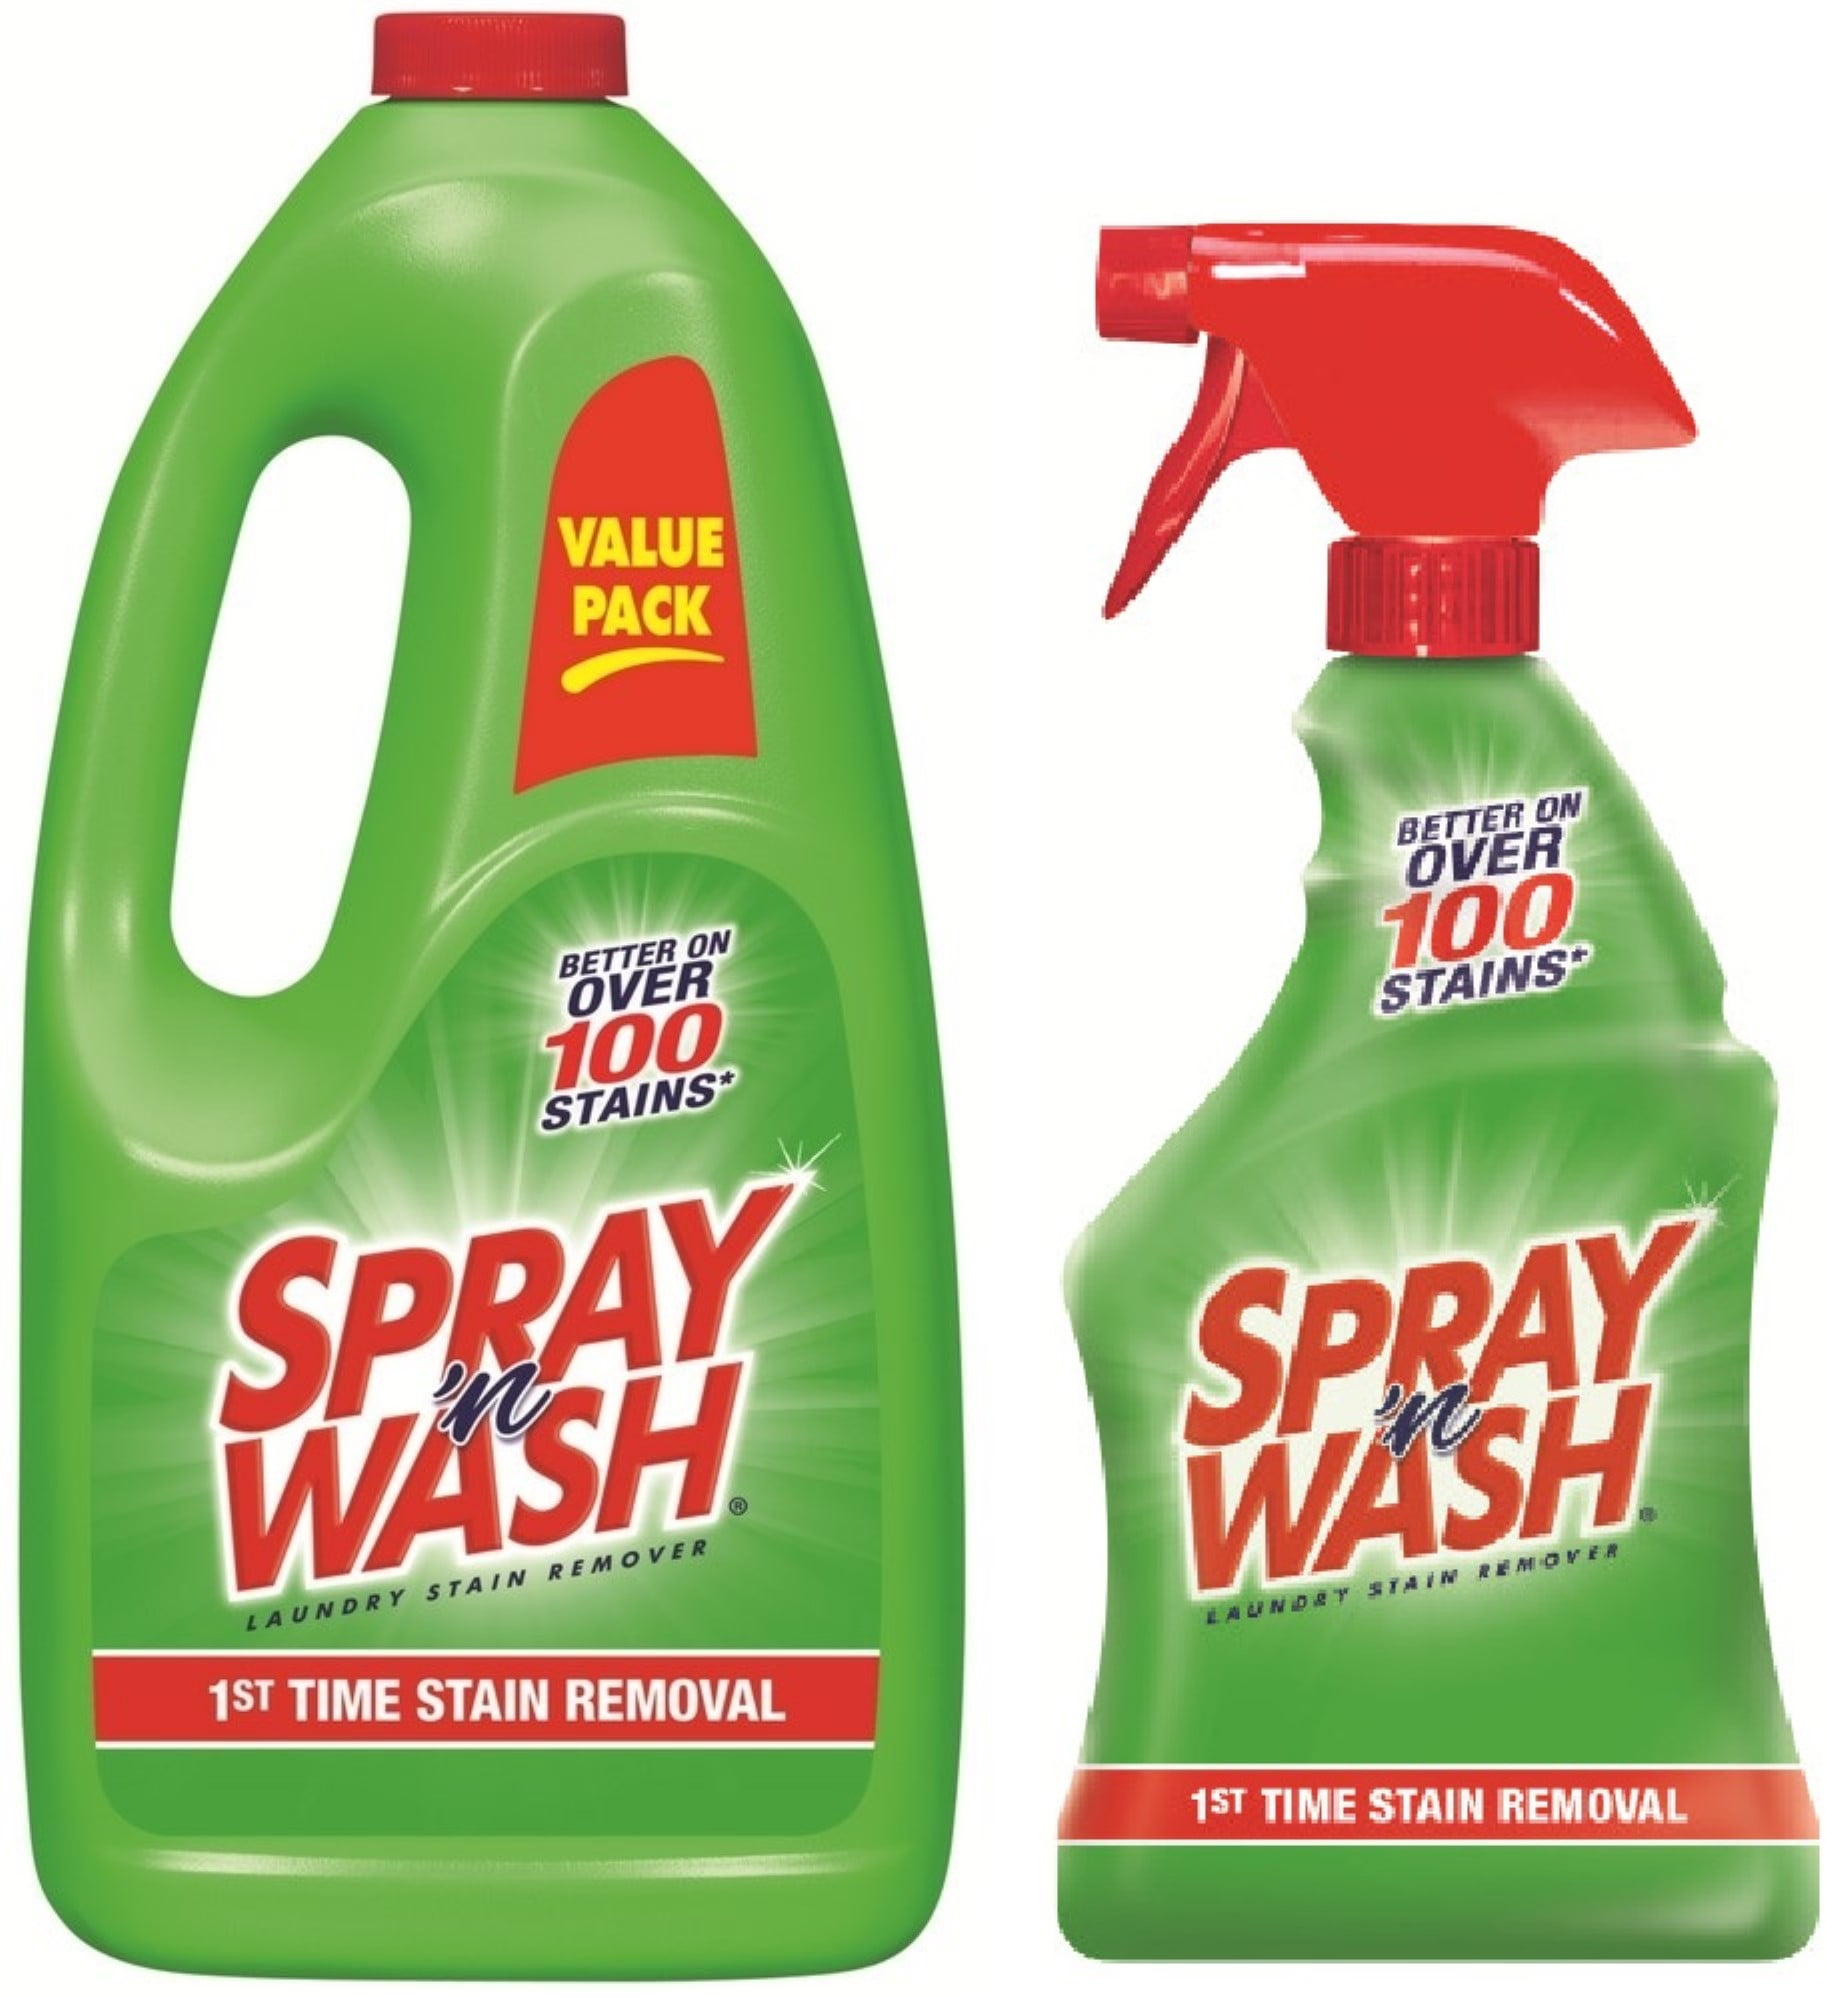 SPRAY 'n WASH® Laundry Stain Remover